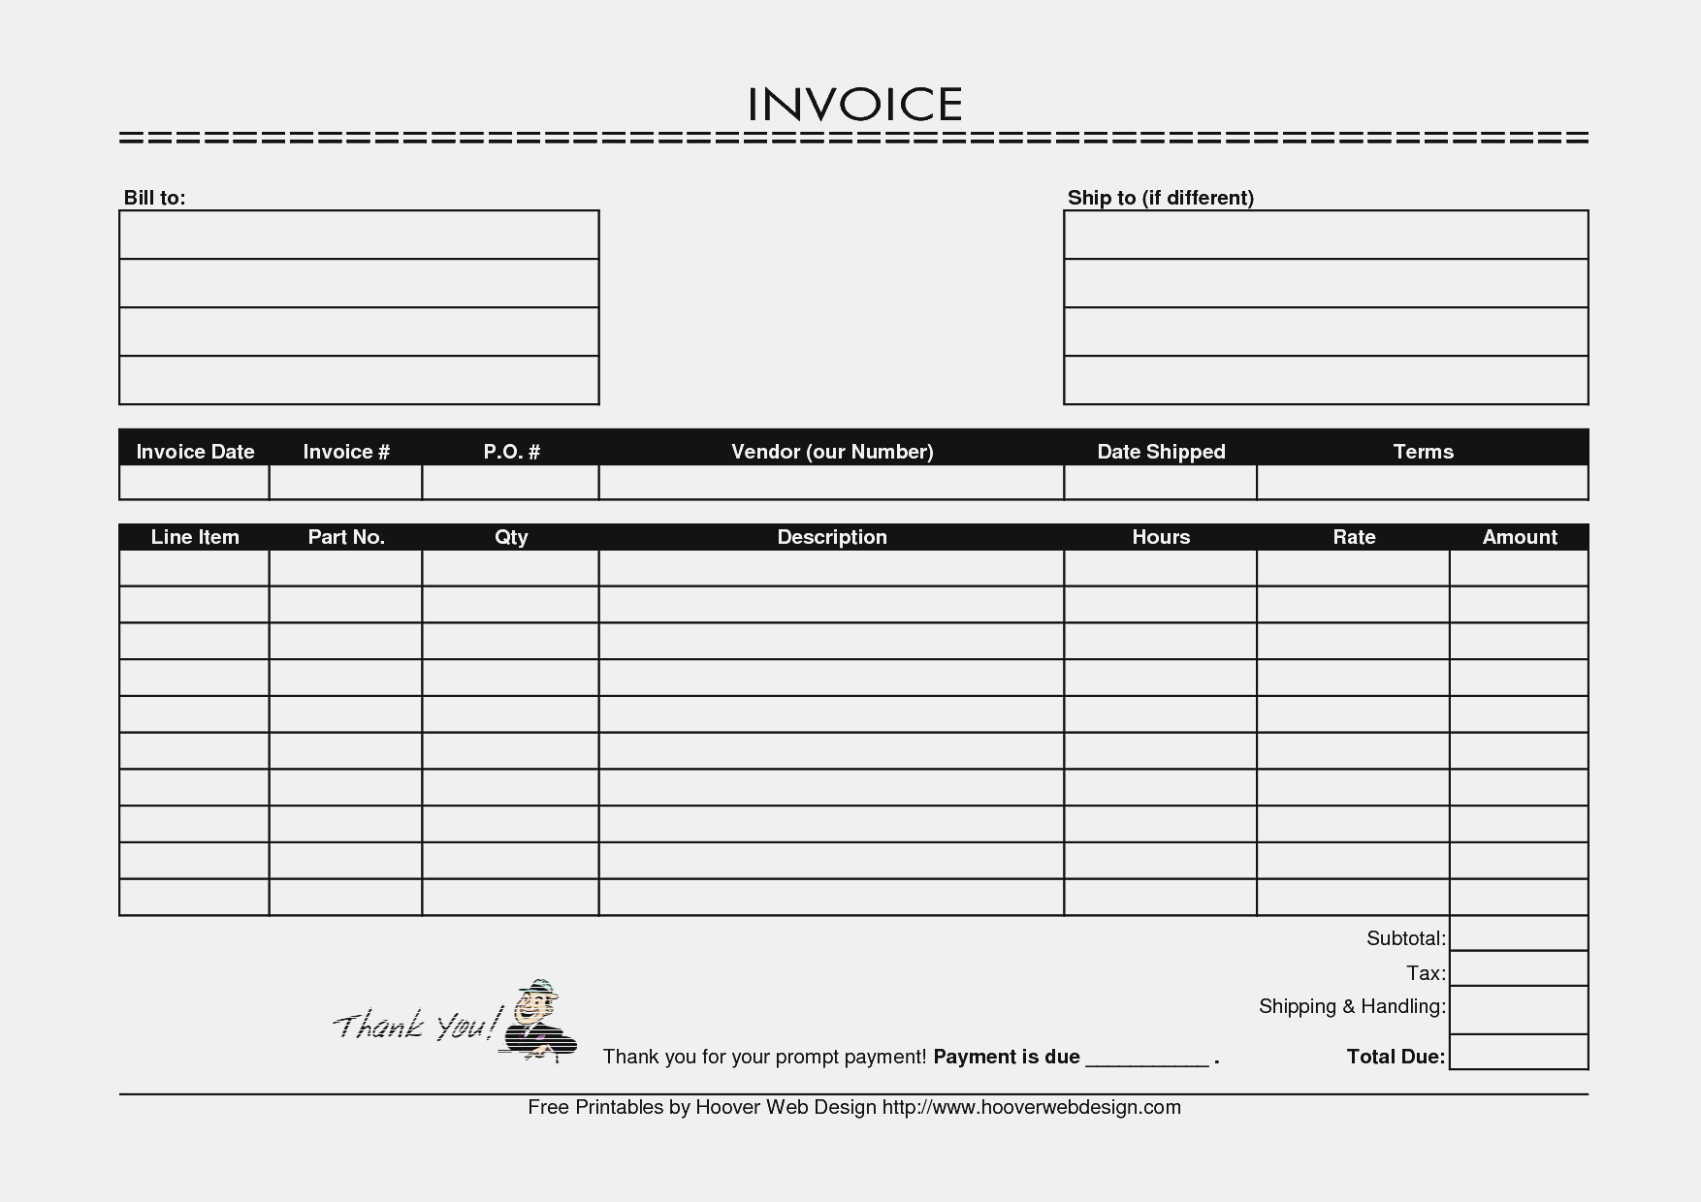 15 Best Images Of Free Printable Business Form Templates Invoice - Free Printable Business Forms